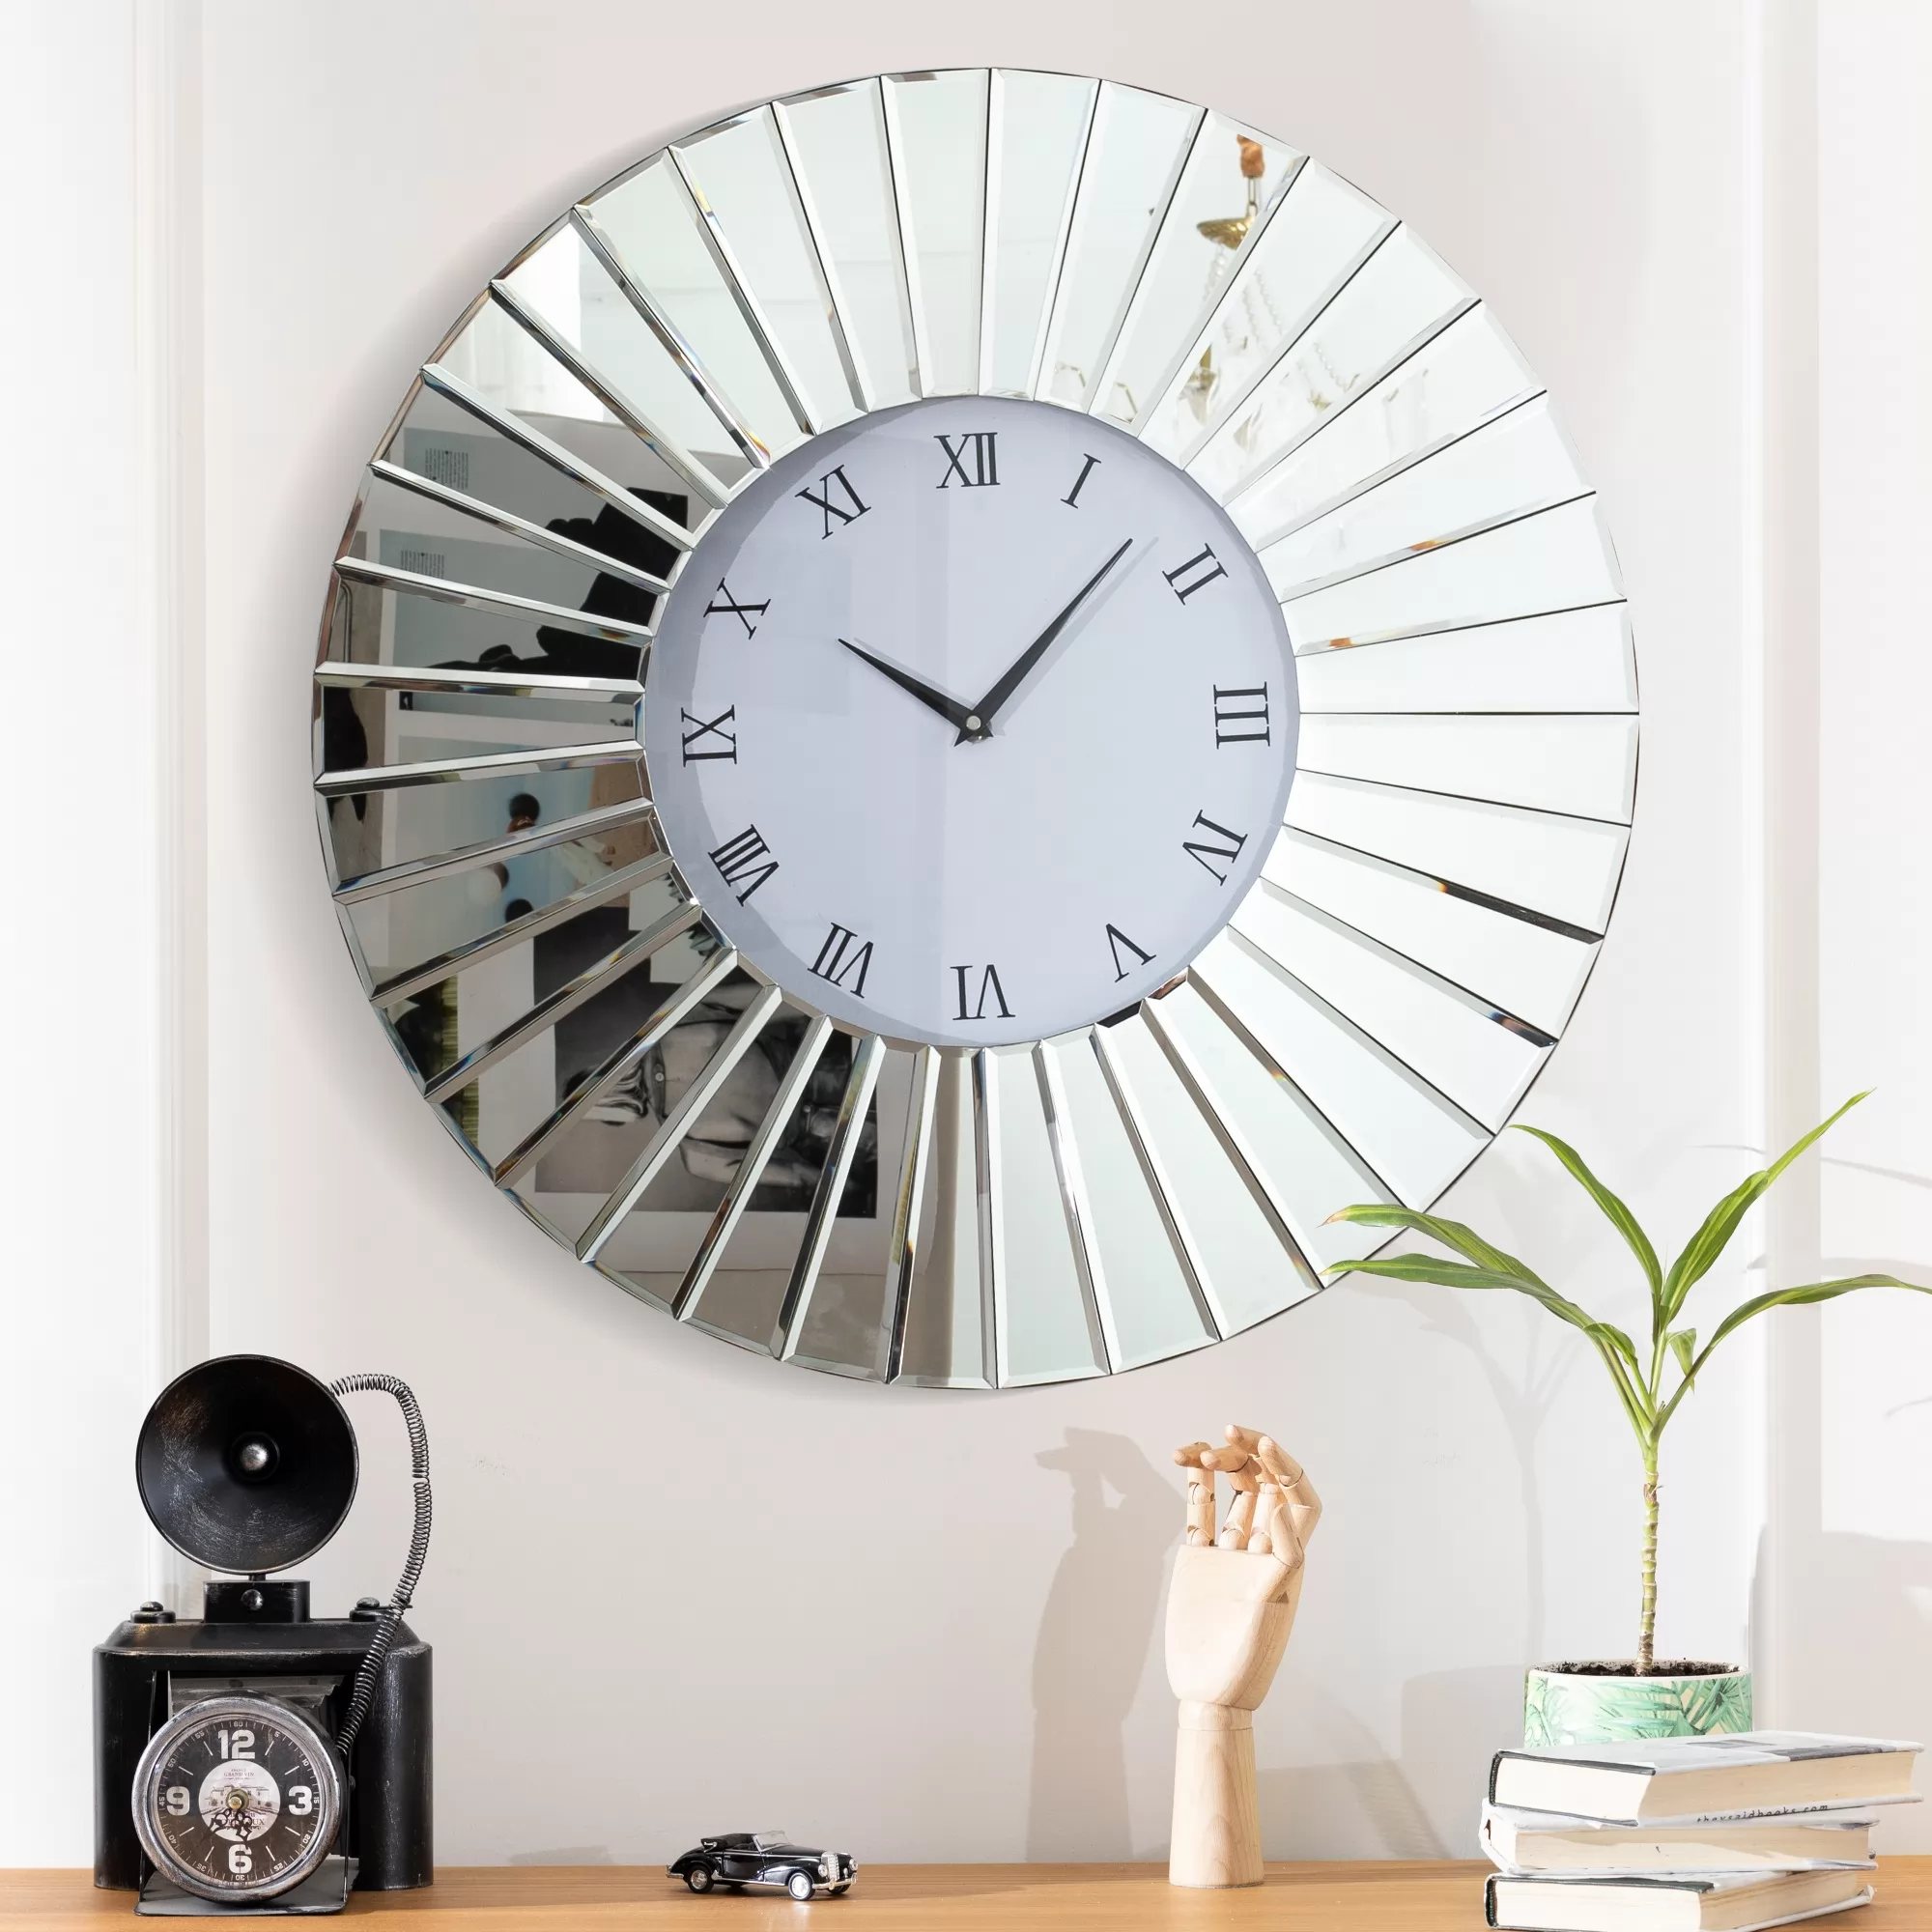 SHYFOY Decorative Wall Clocks for Living Room Decor - 32" Modern Wall Clock Mirrored Finish Fan Frame, Sparkly Large Round Clock Silver Wall Decor for